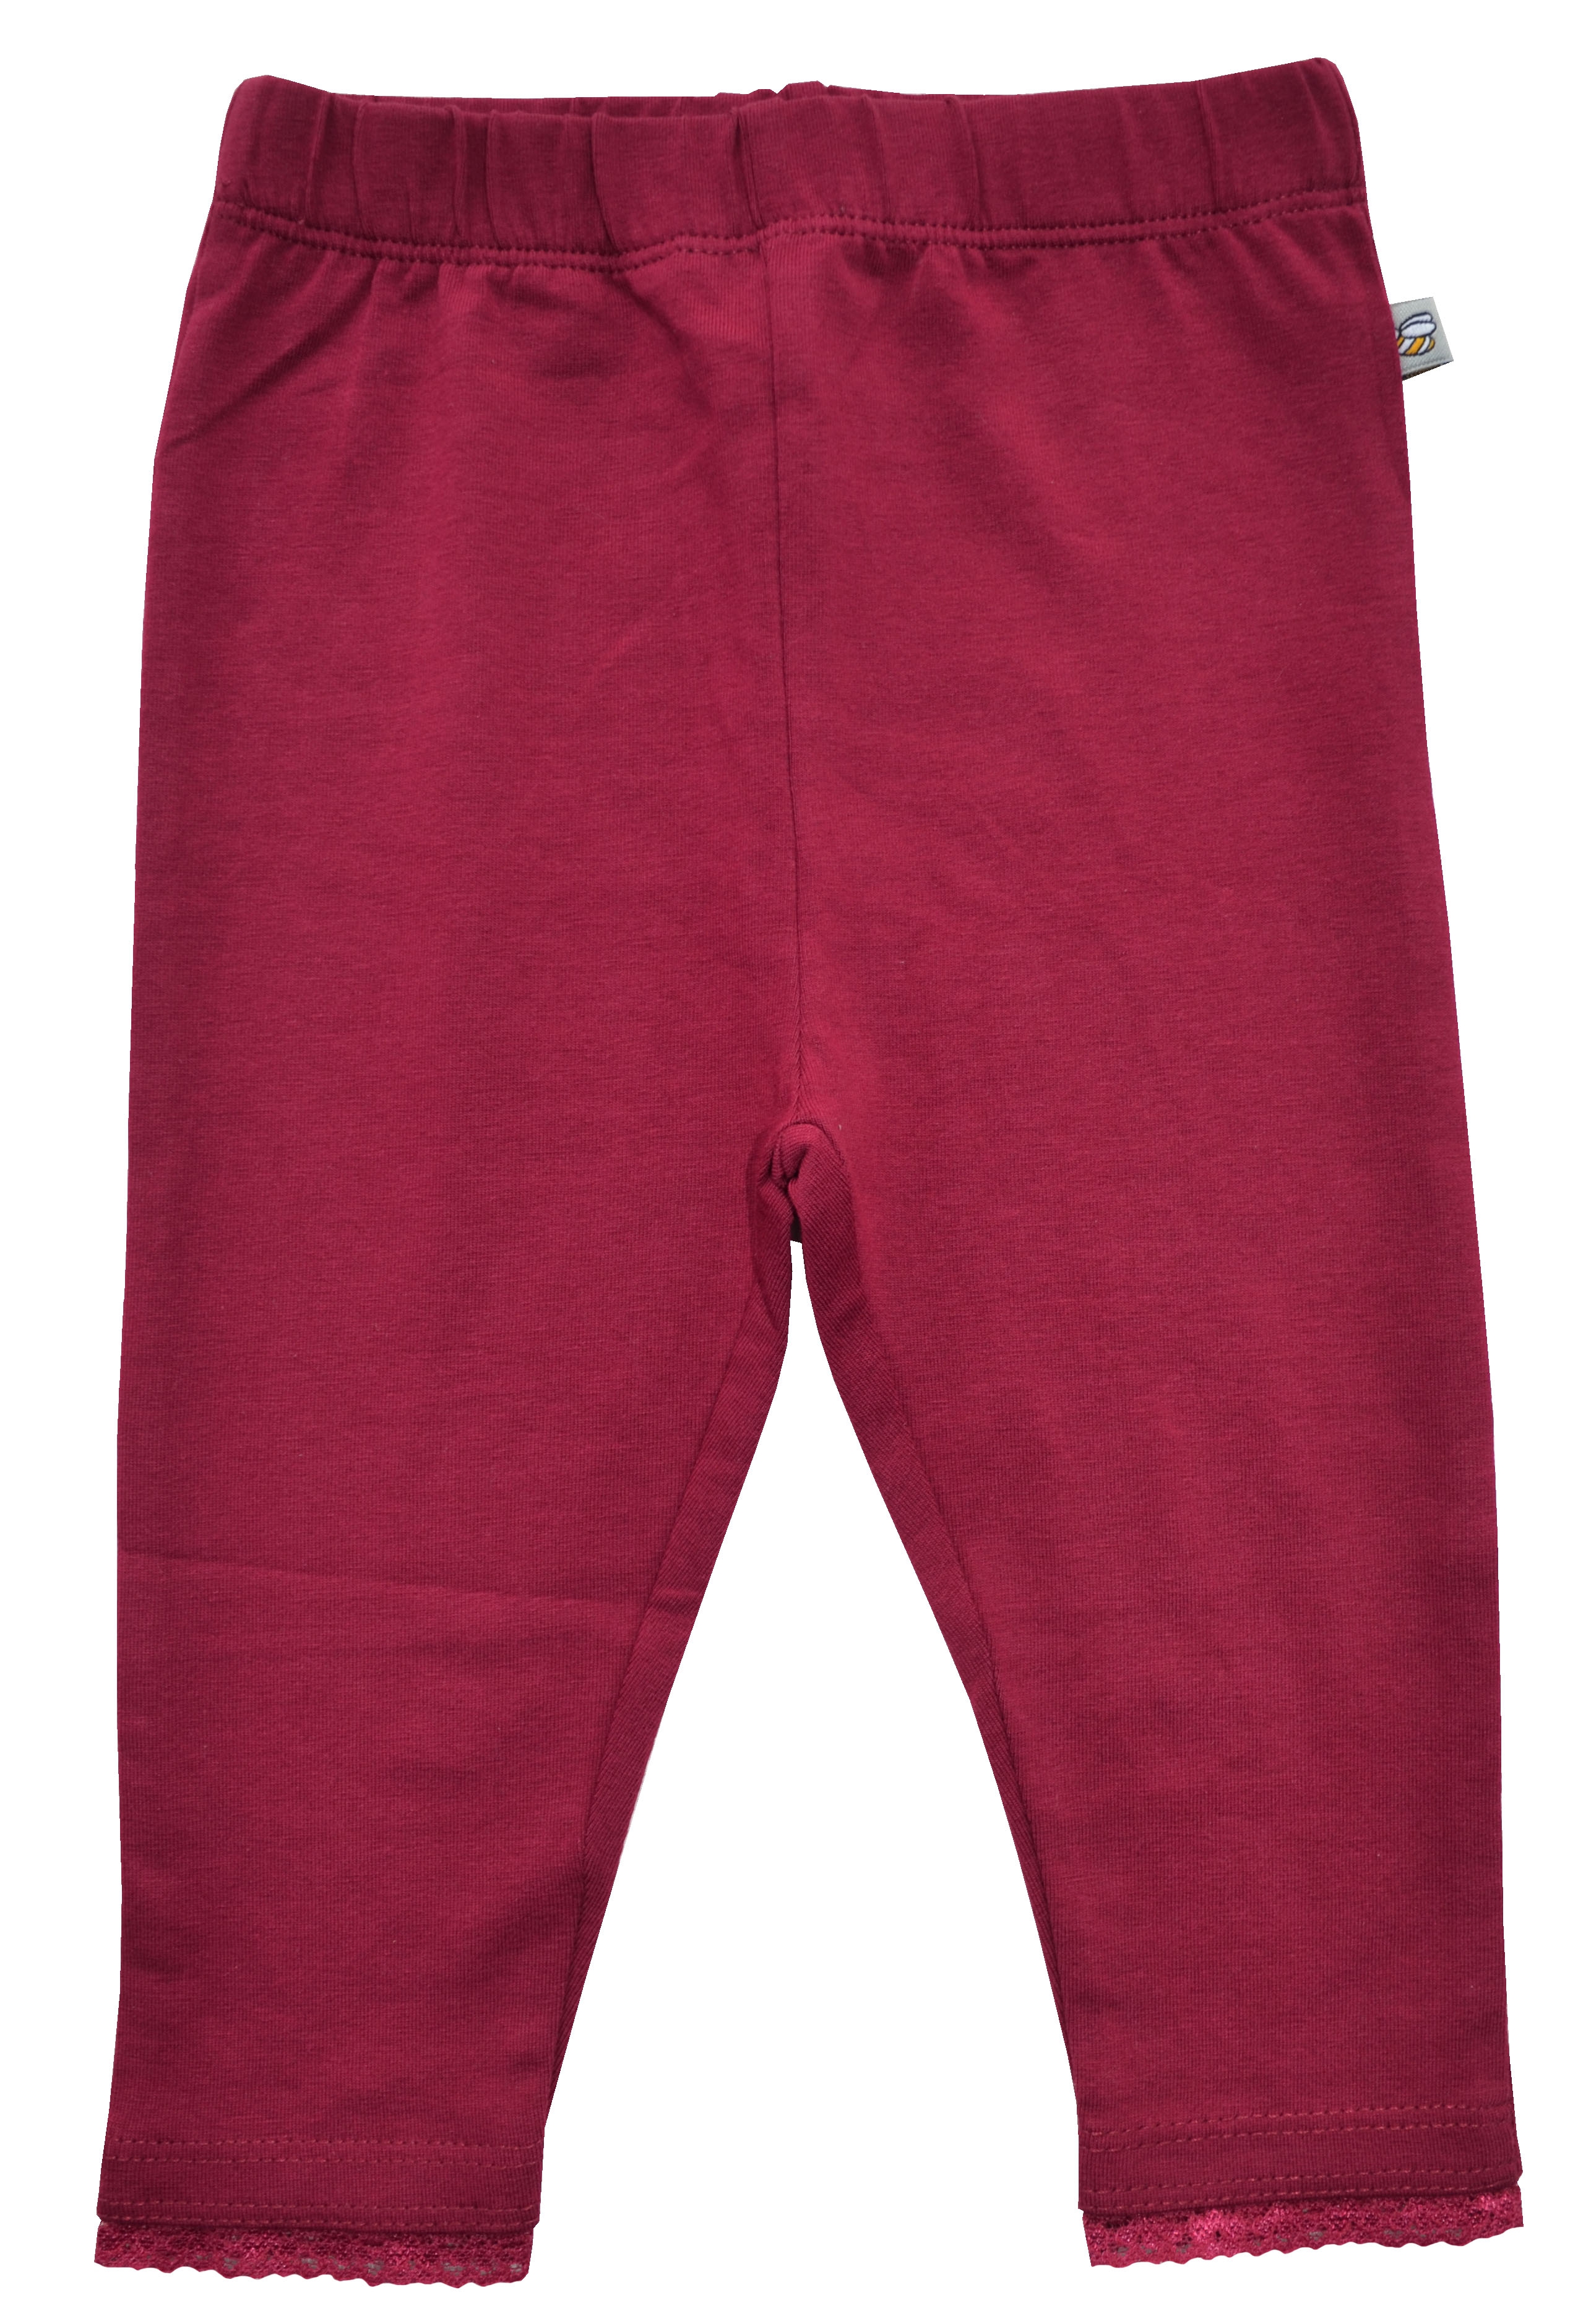 Babeez | Girls Maroon Solid Leggings (95% Cotton 5%Elasthan Jersey) undefined